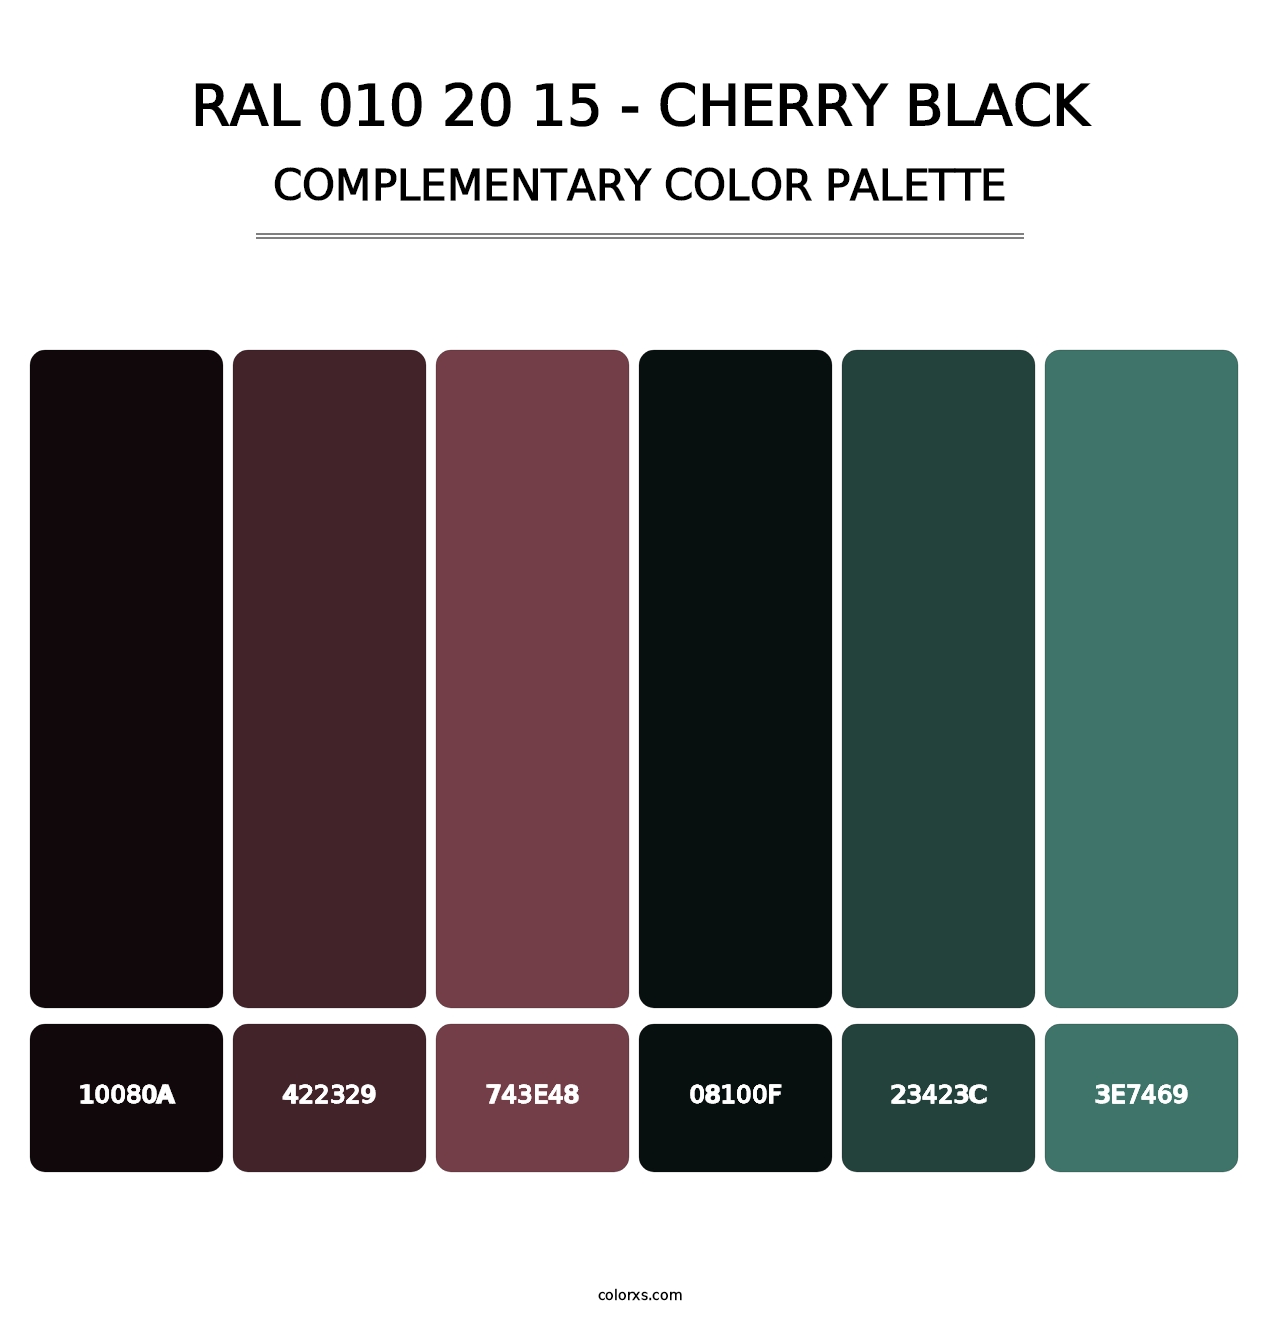 RAL 010 20 15 - Cherry Black - Complementary Color Palette